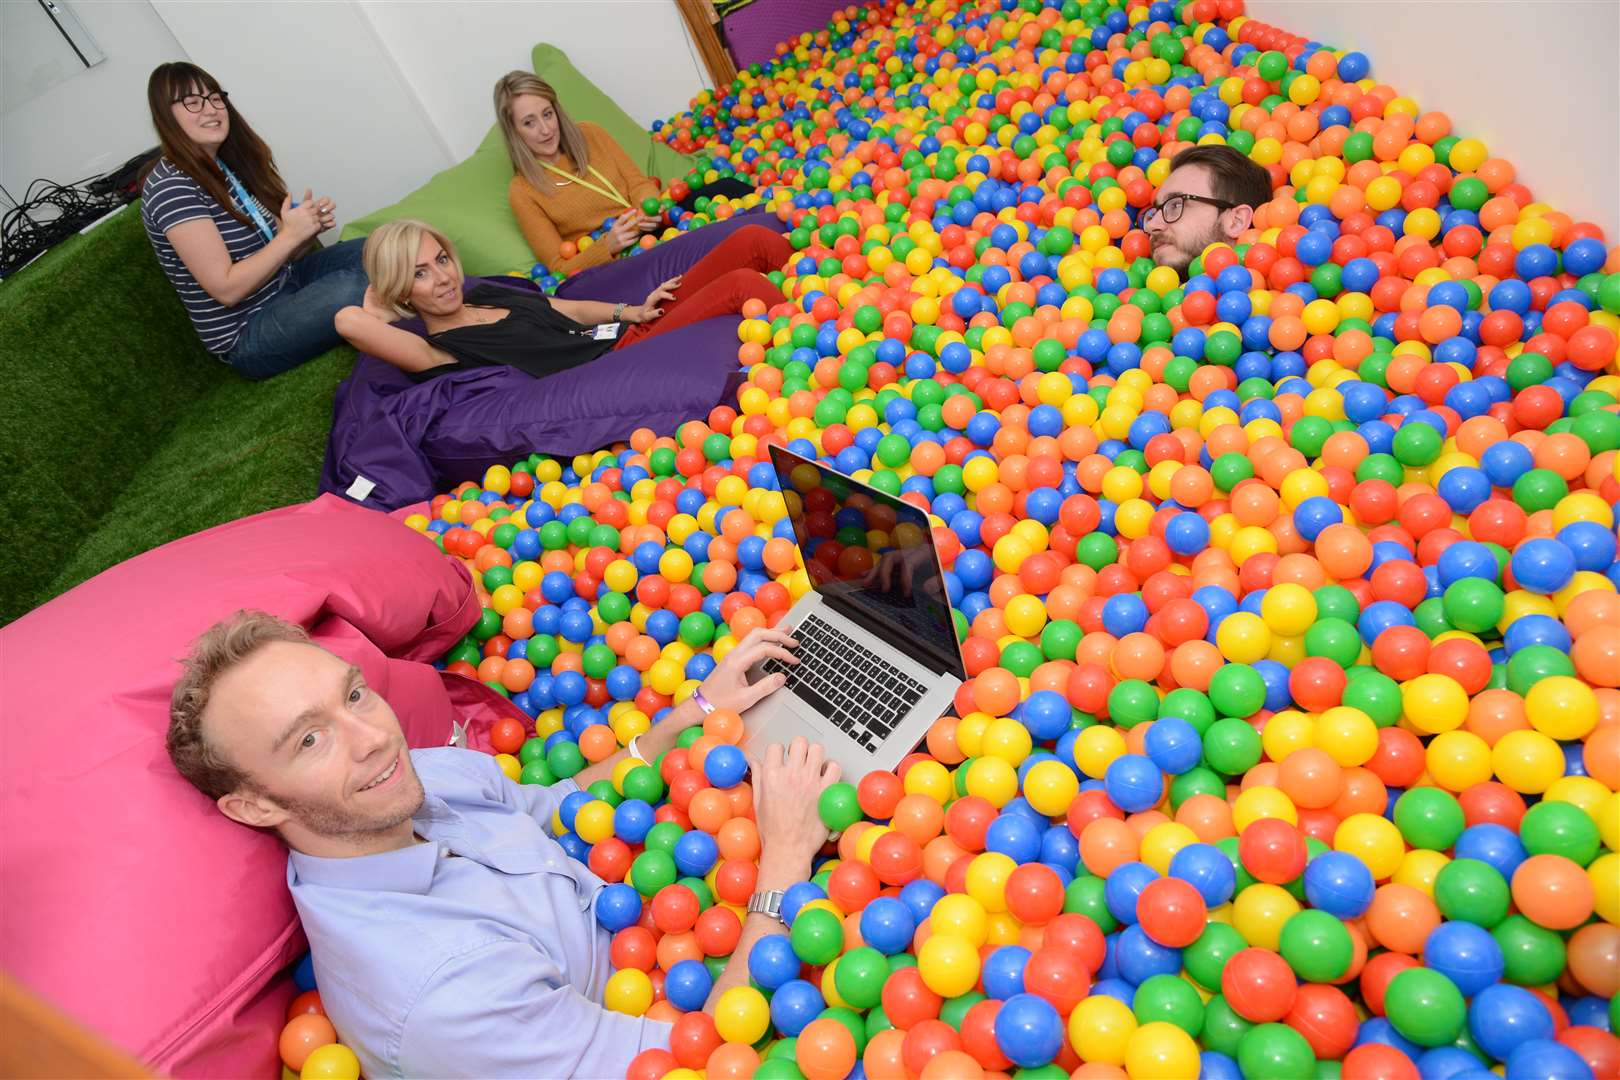 Sleeping Giant Media boss Luke Quilter begins a meeting in the ball pool